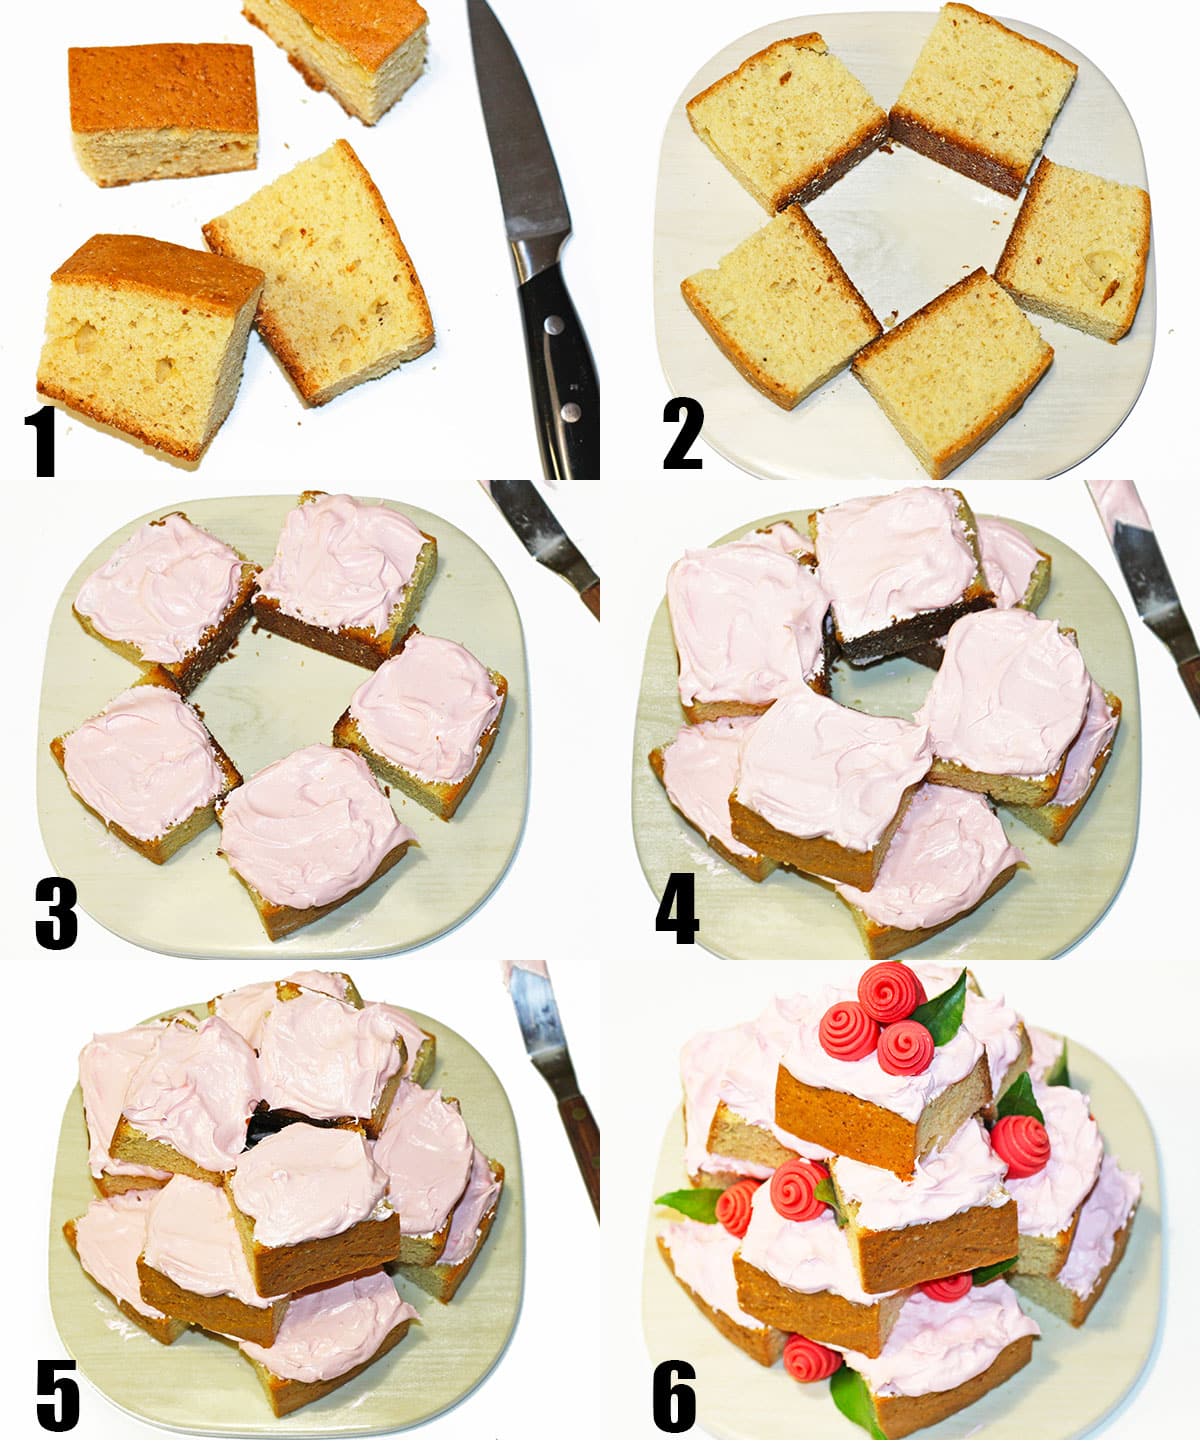 Collage Image With Step by Step Process Shots on How to Make Easy DIY Tower Cake. 